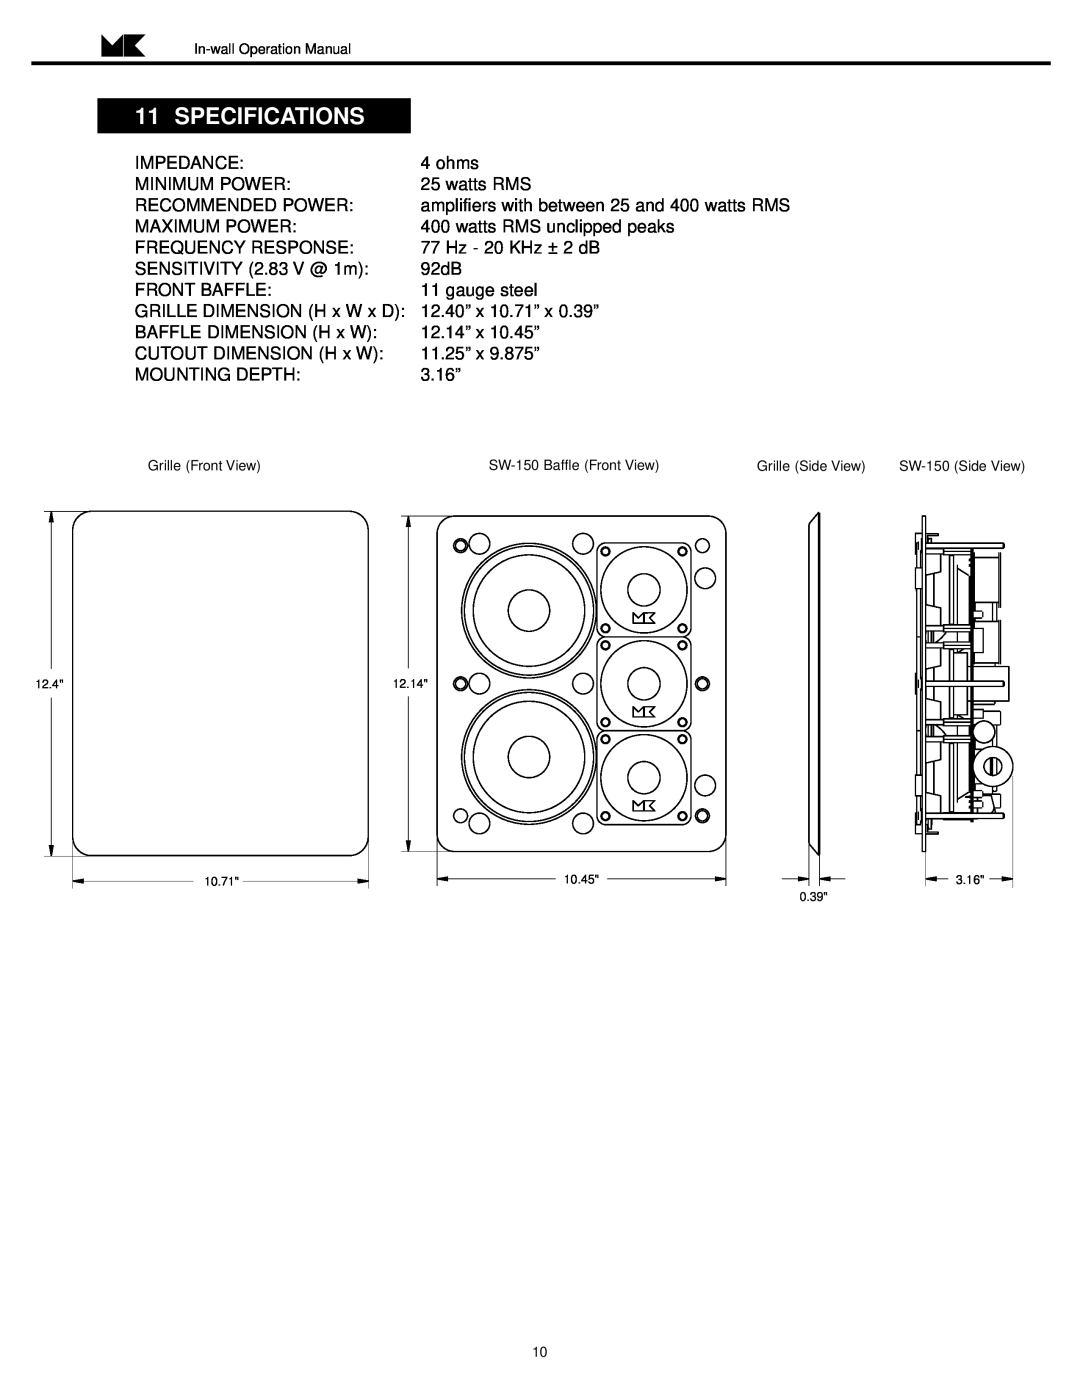 MK Sound SW-150 operation manual Specifications 